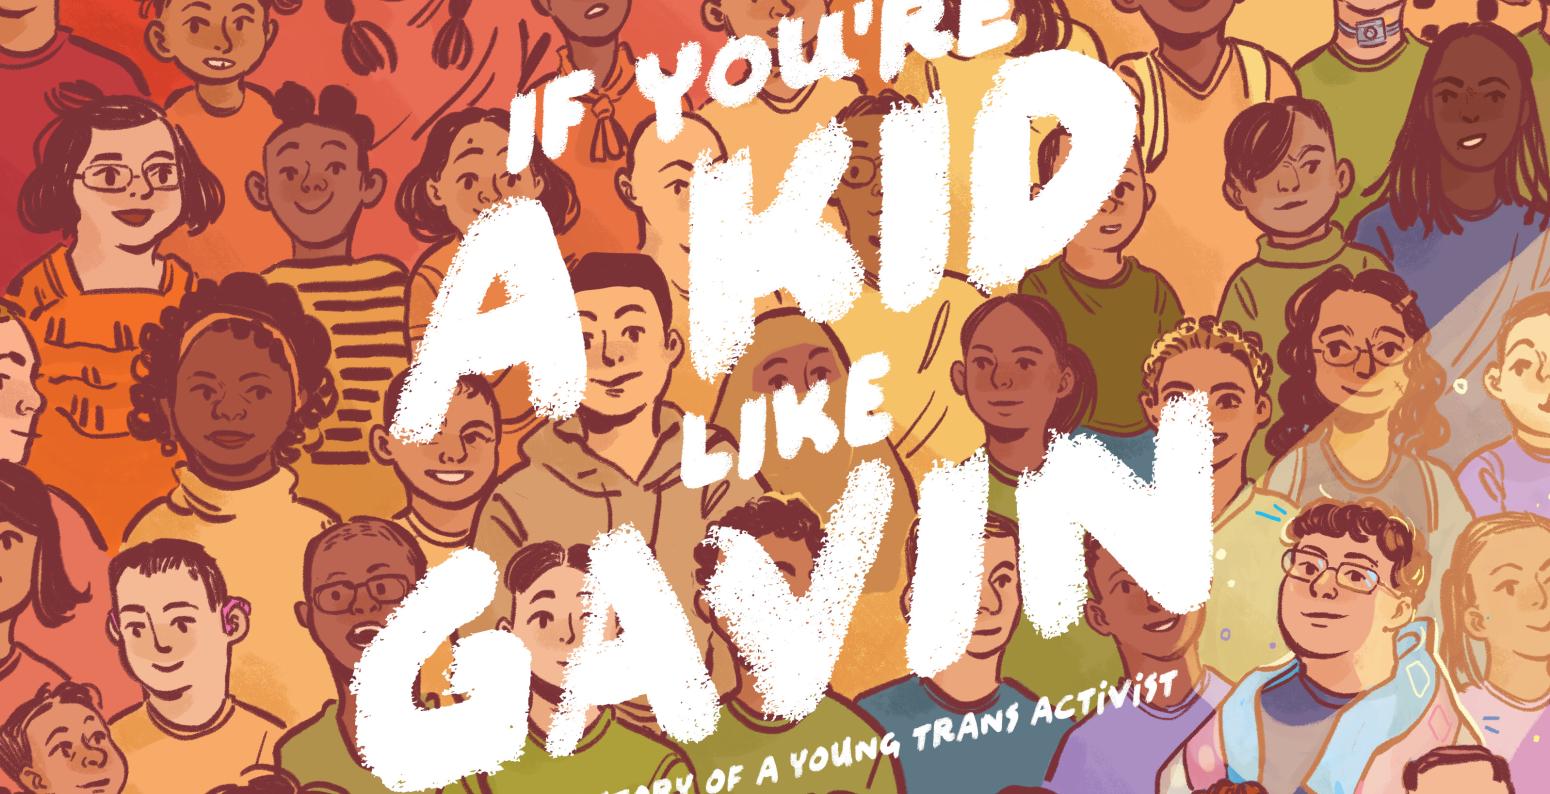 Book cover showing many faces of youth and the title, "If You're A Kid Like Gavin."